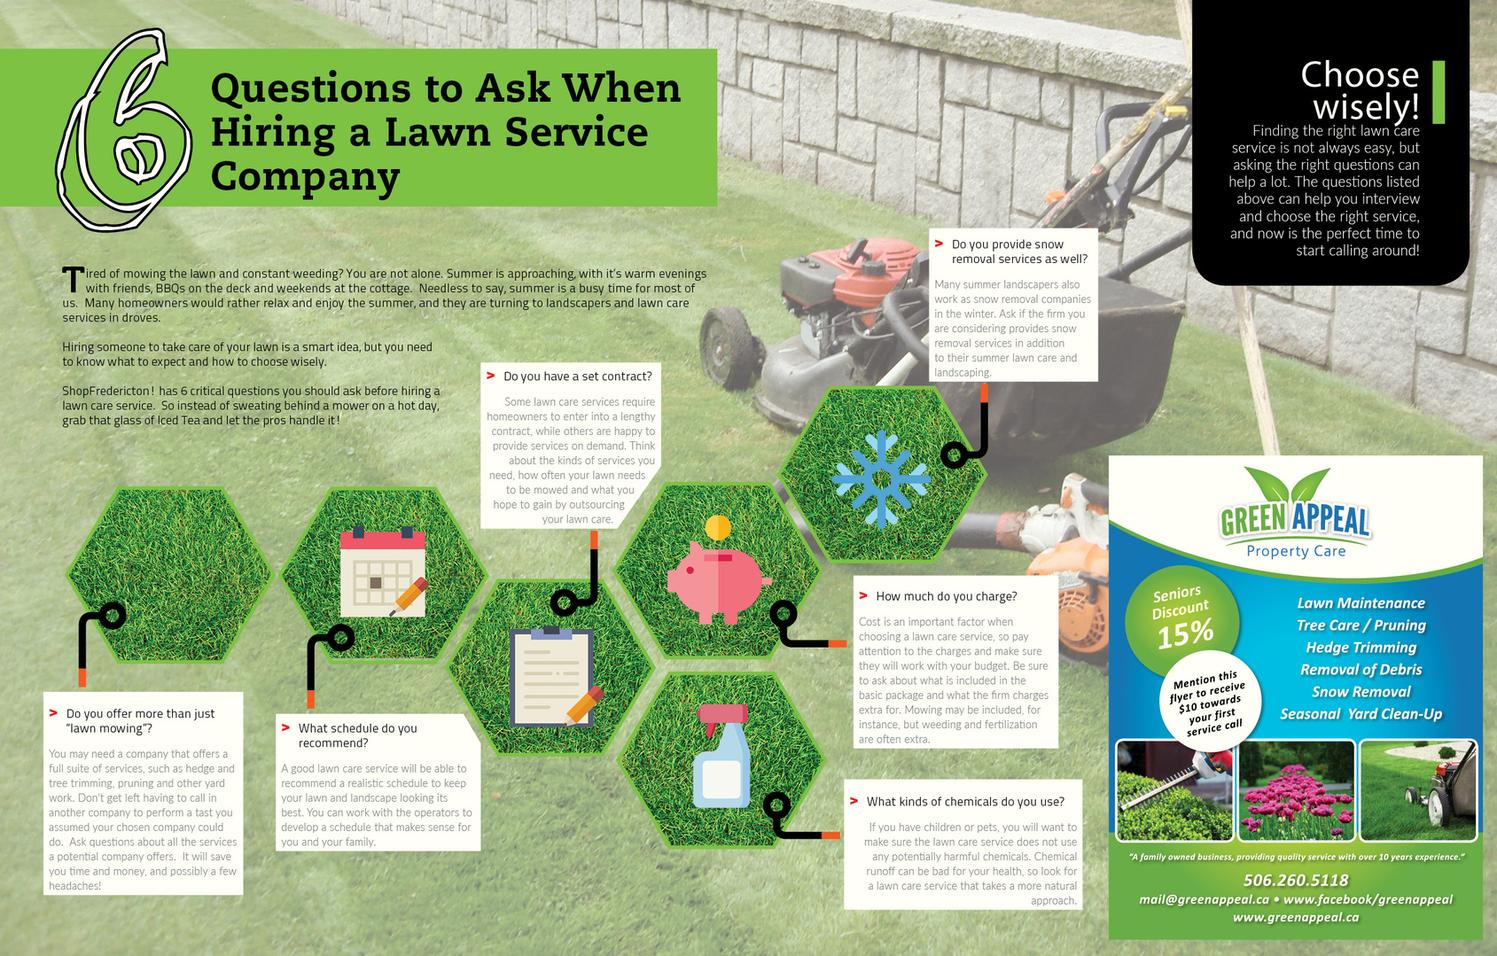 lawn care, lawn mowing, gardening, tree trimming, snow removal and snow blowing